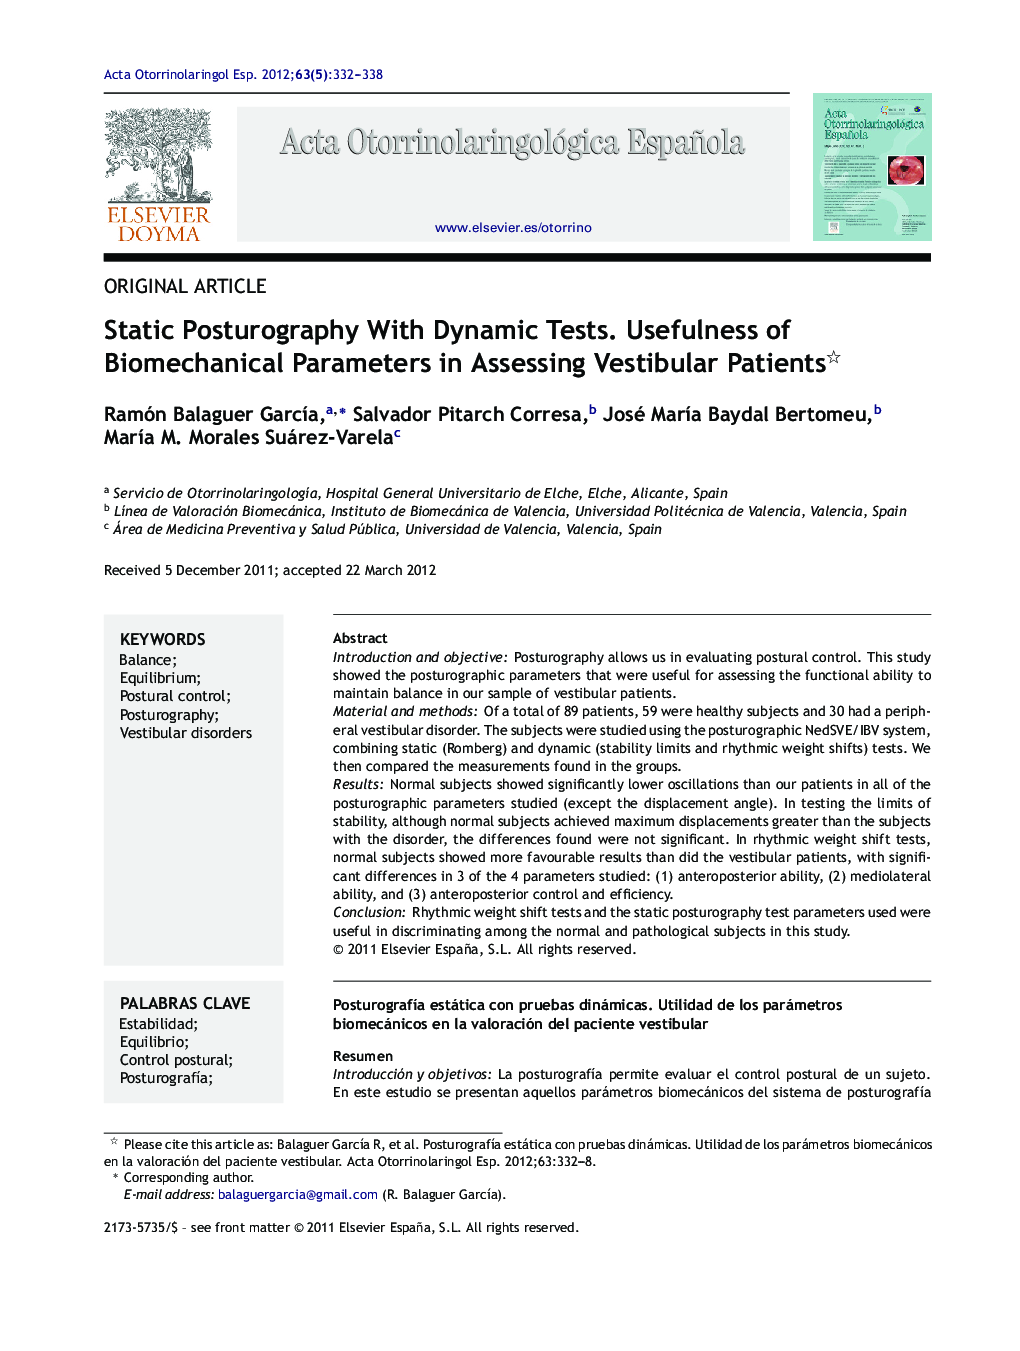 Static Posturography With Dynamic Tests. Usefulness of Biomechanical Parameters in Assessing Vestibular Patients